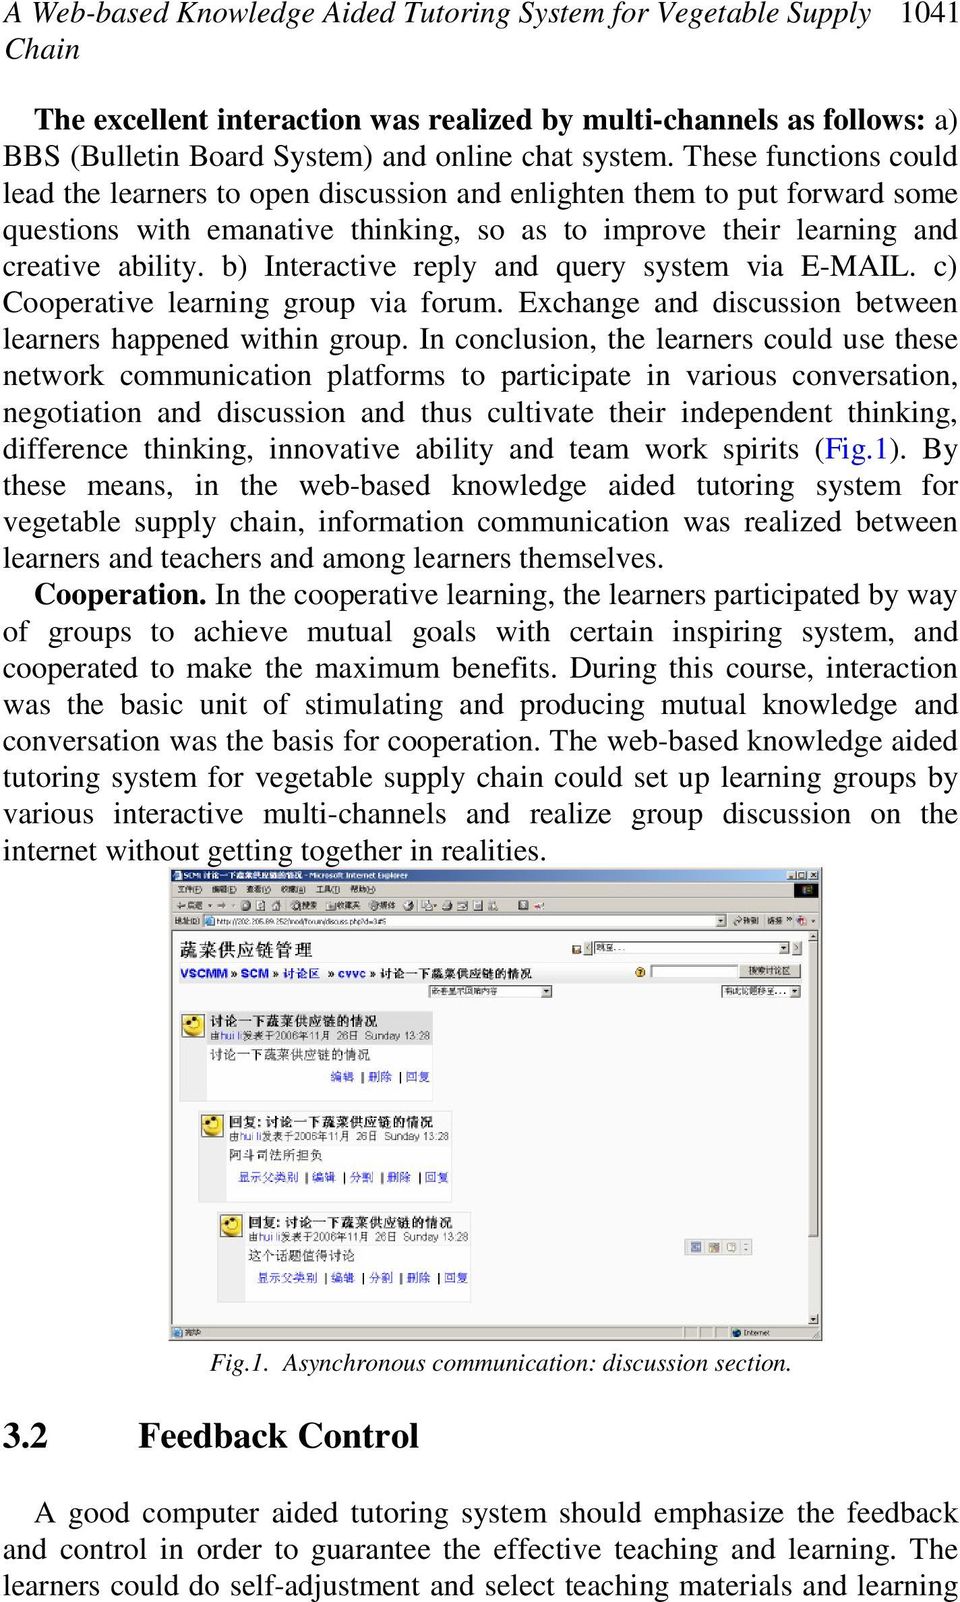 b) Interactive reply and query system via E-MAIL. c) Cooperative learning group via forum. Exchange and discussion between learners happened within group.